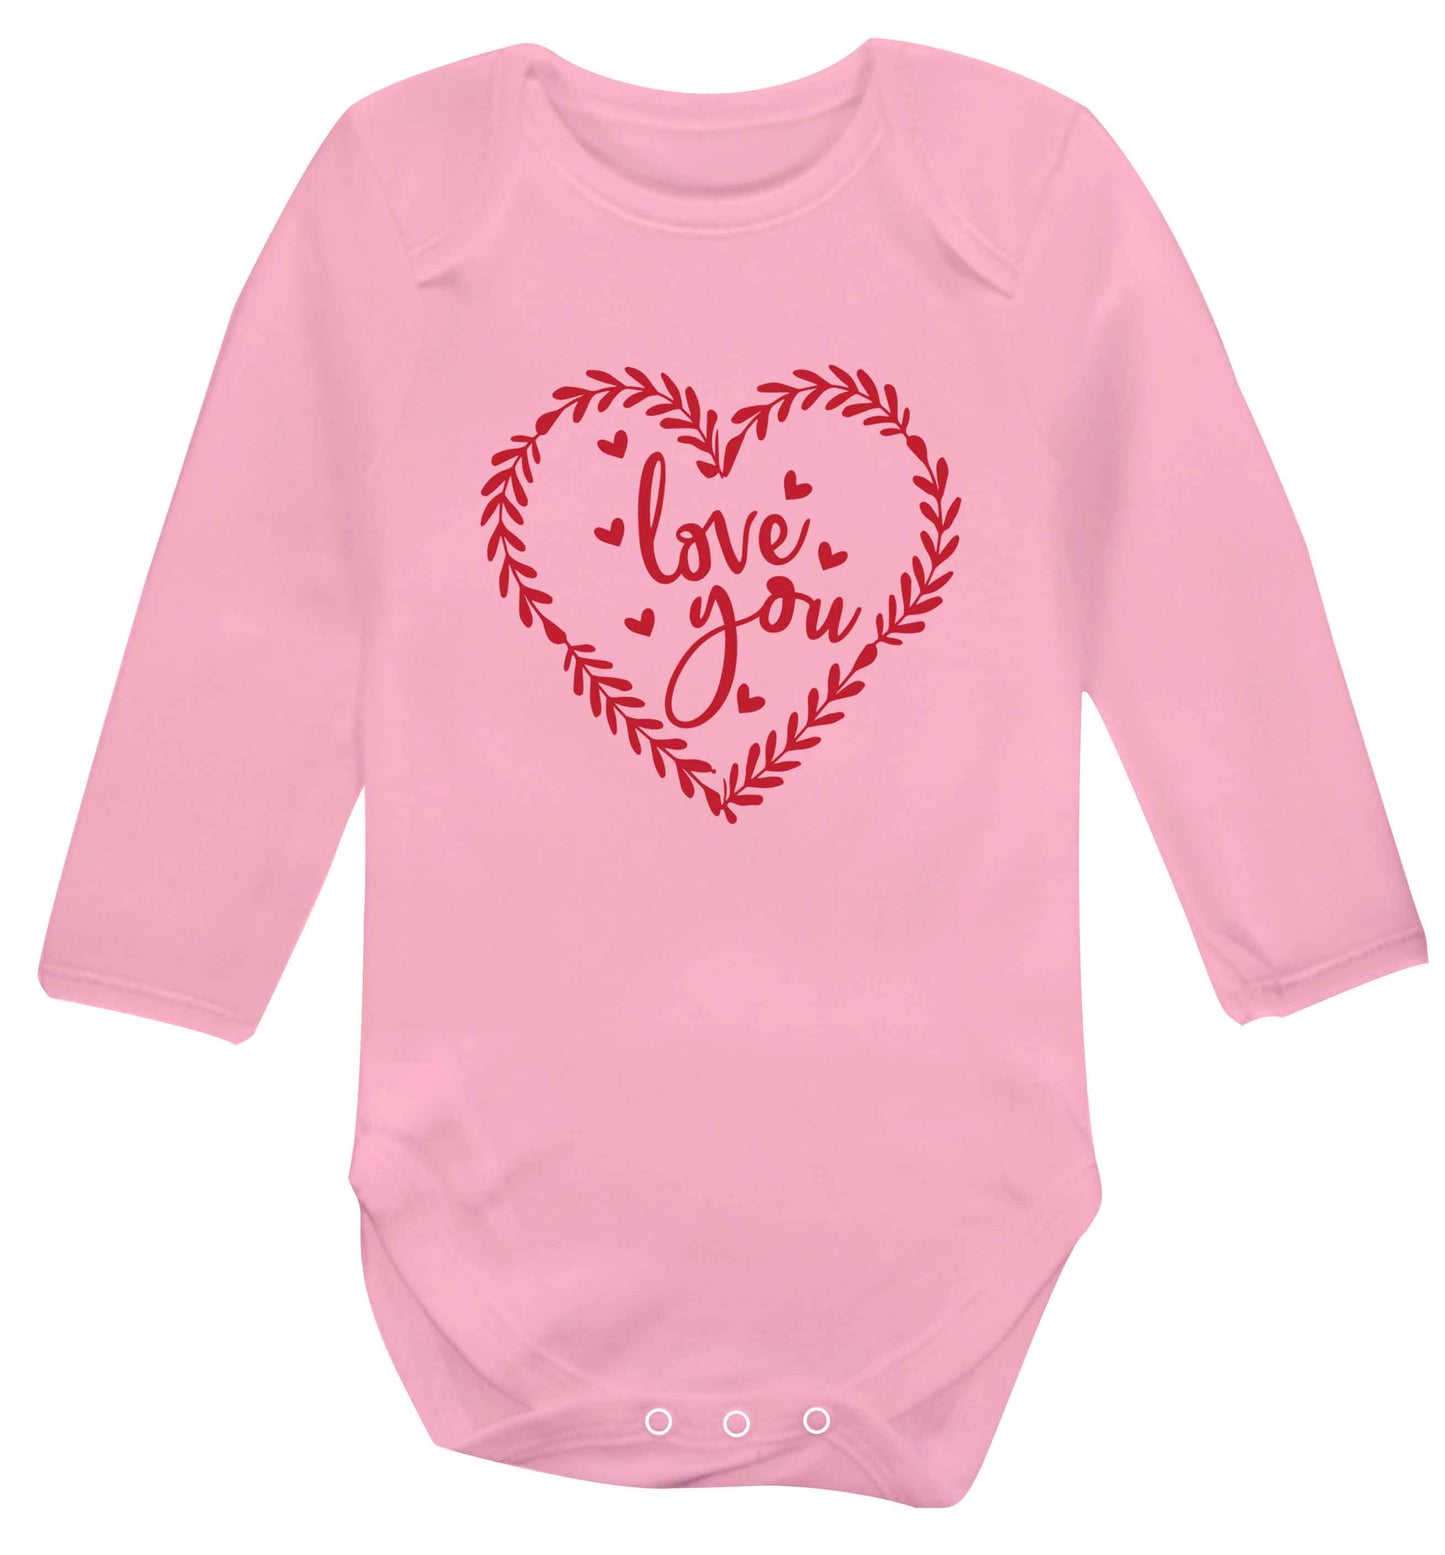 Love you baby vest long sleeved pale pink 6-12 months